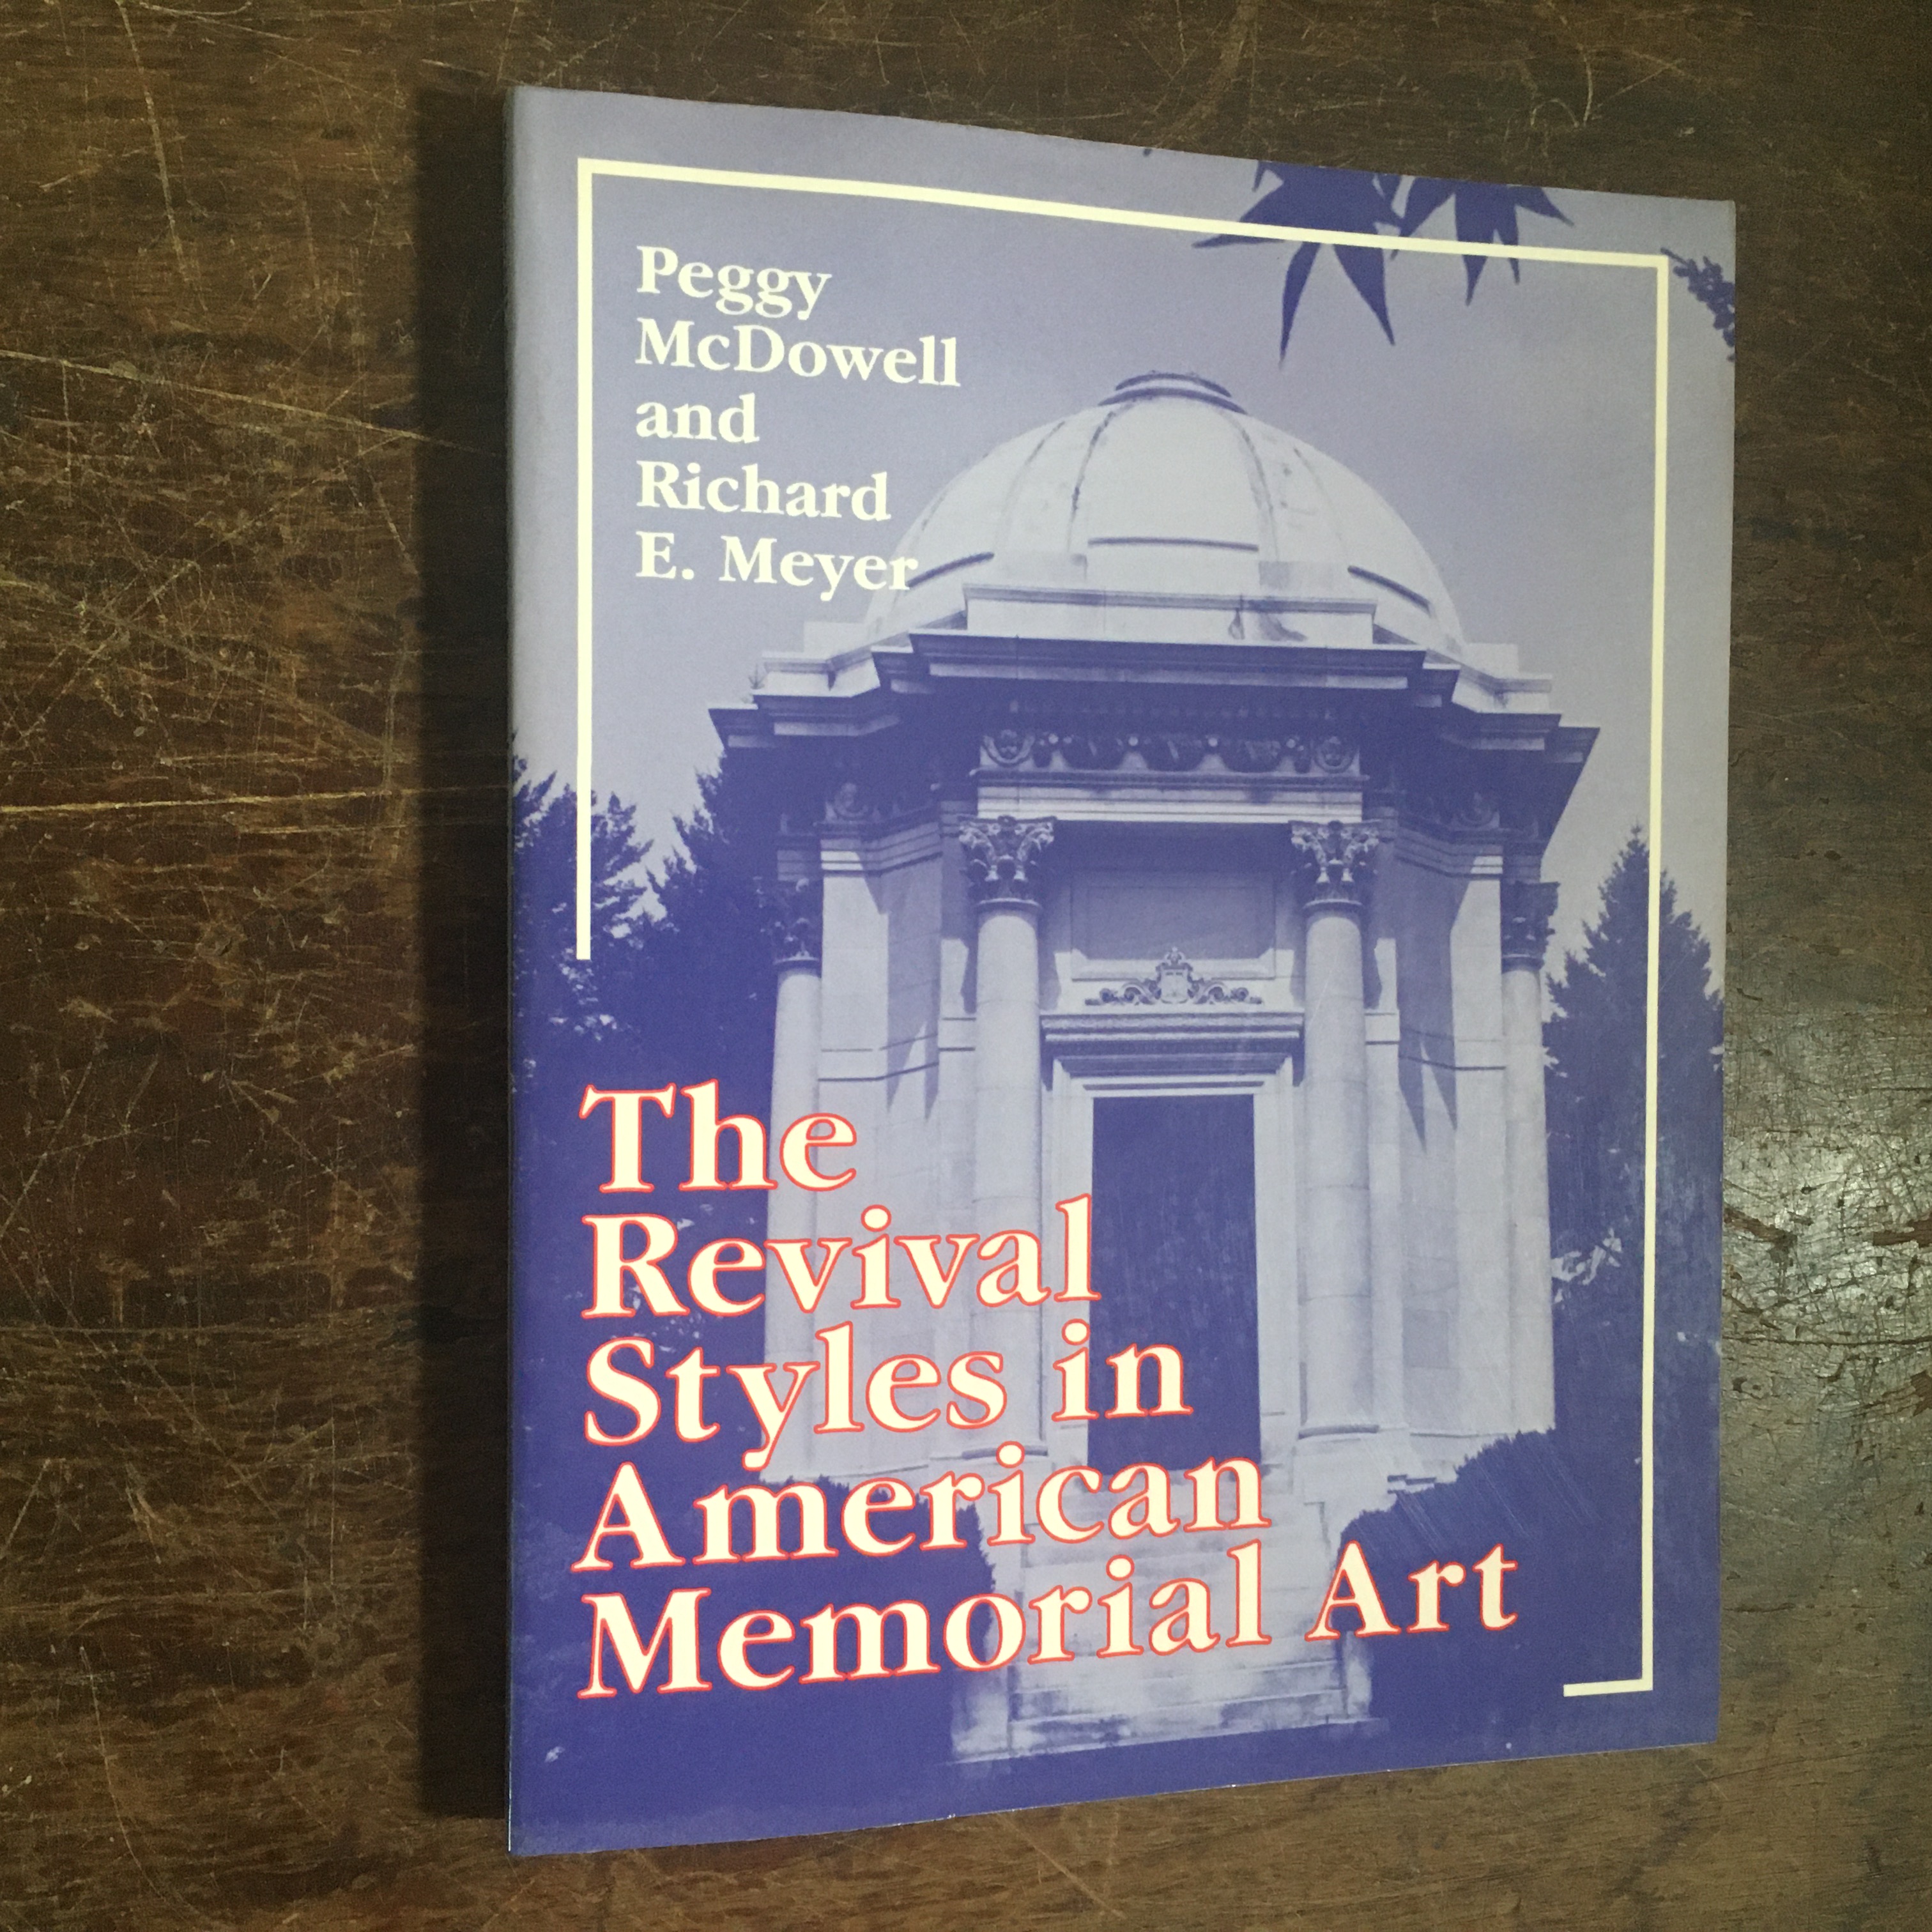 The Revival Styles in American Memorial Art - McDowell, Peggy and Richard E. Meyer.